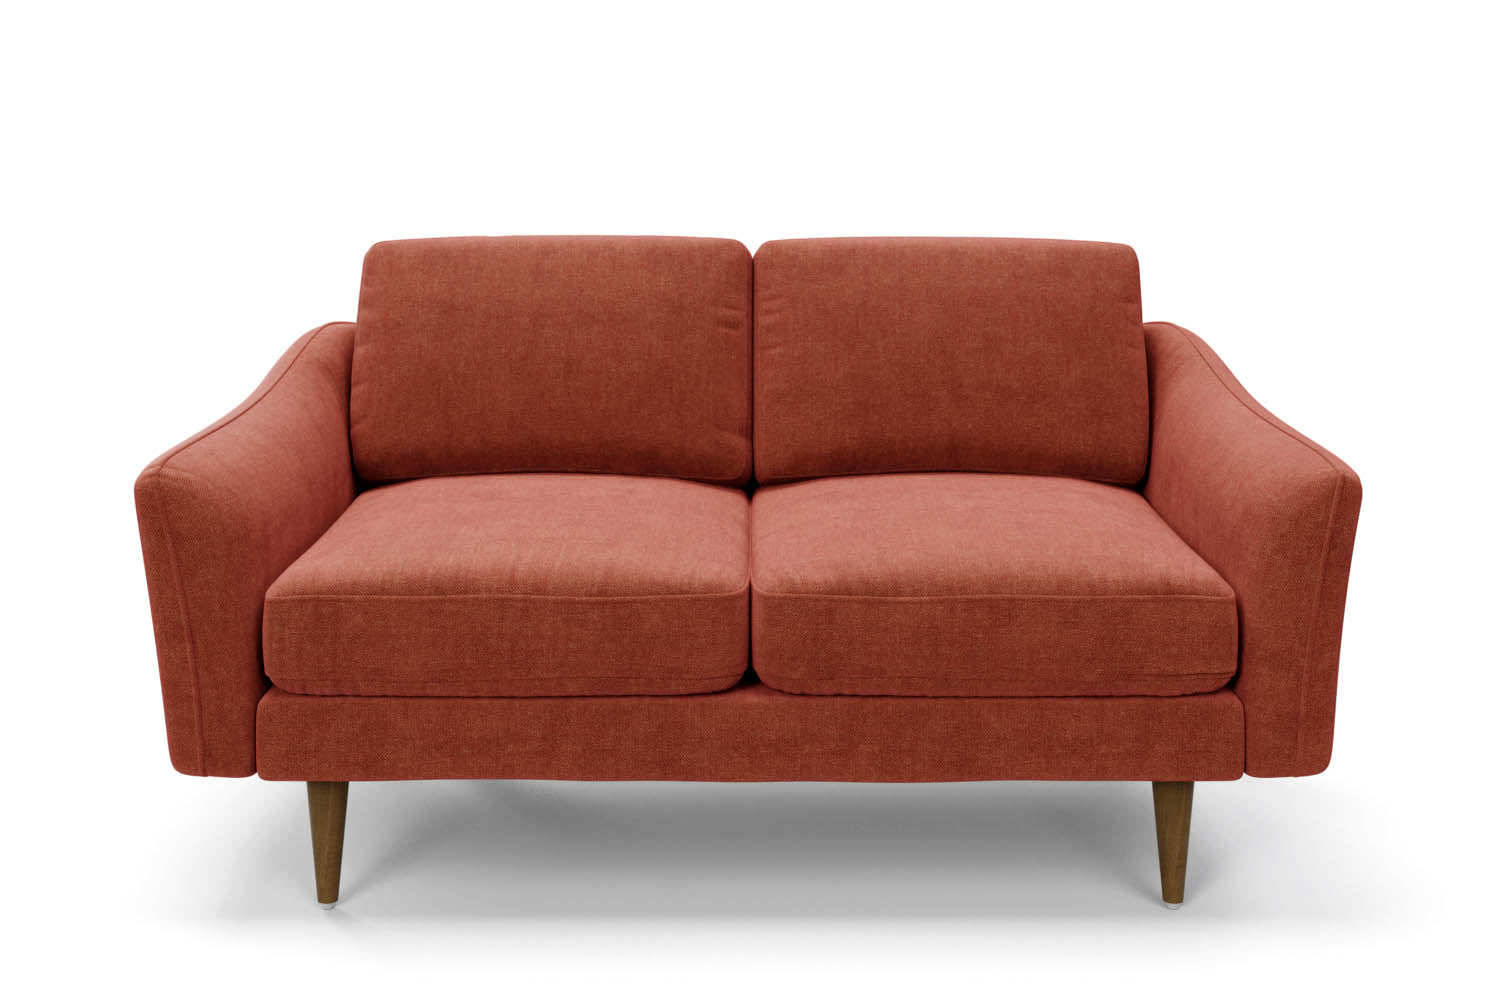 The Rebel 2 Seater Sofa in Spice with brown legs front variant_40886276423728